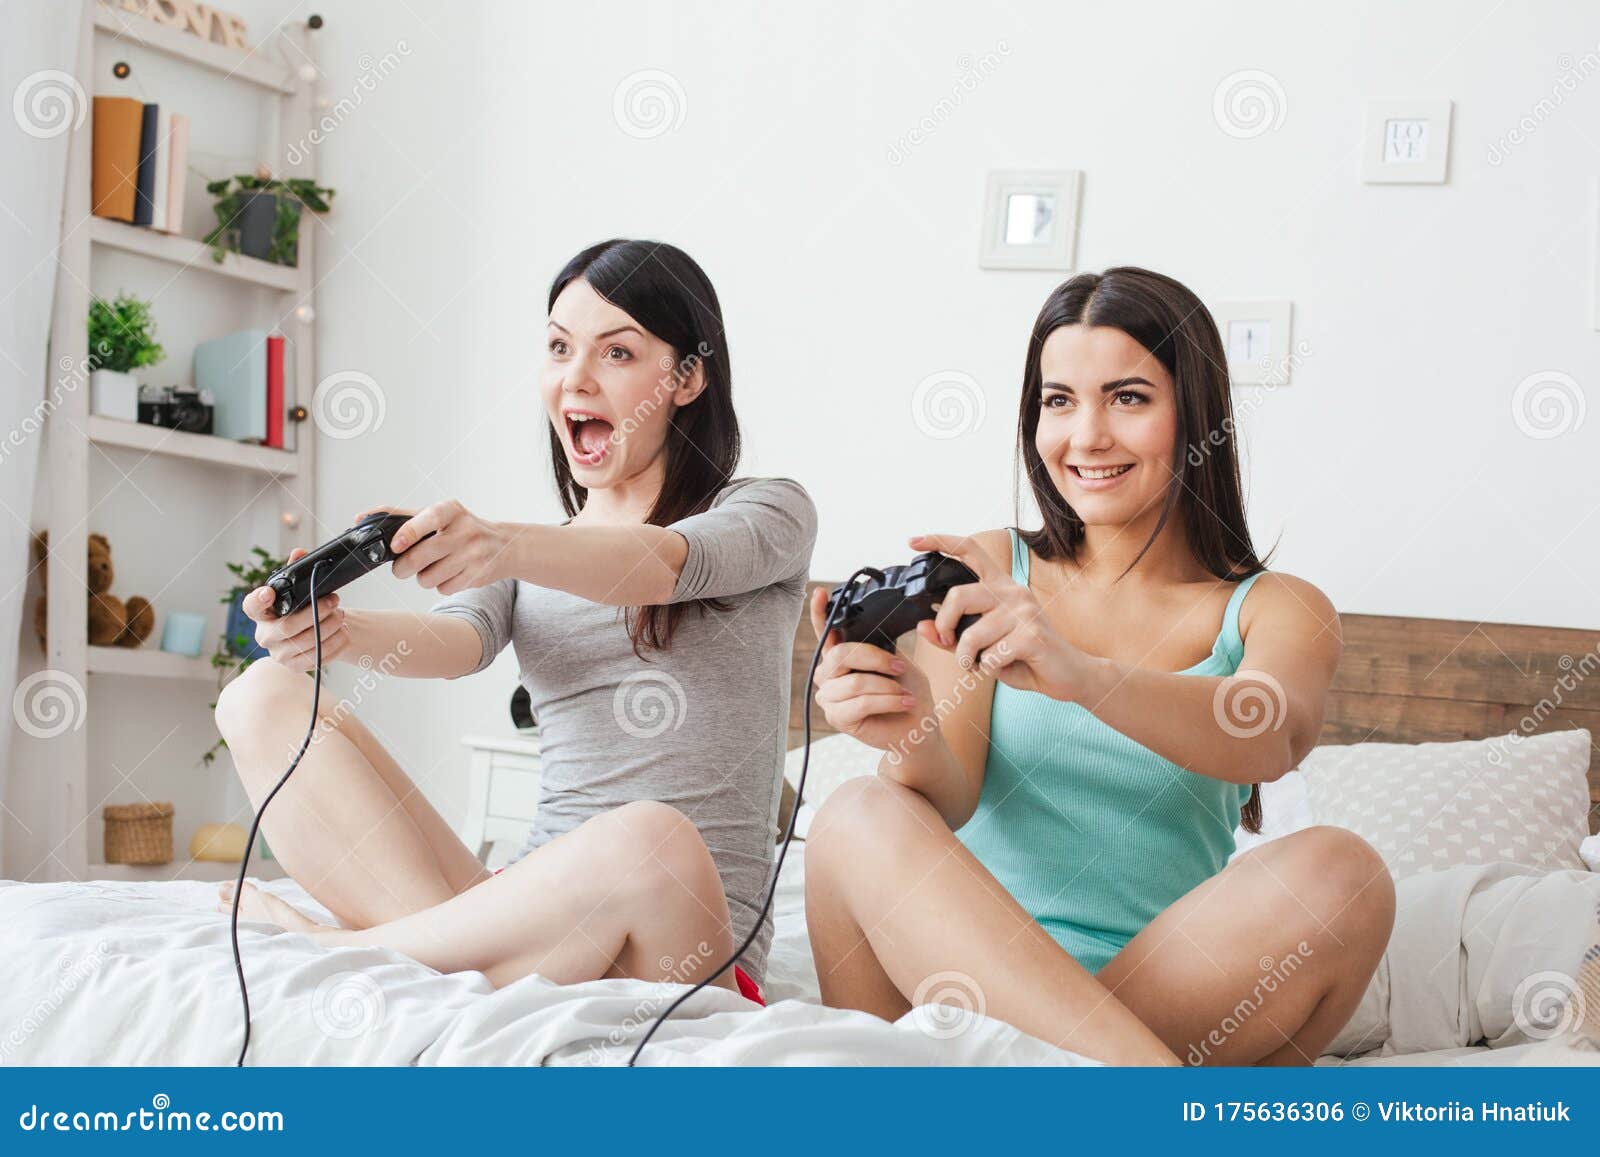 lesbian playing each other